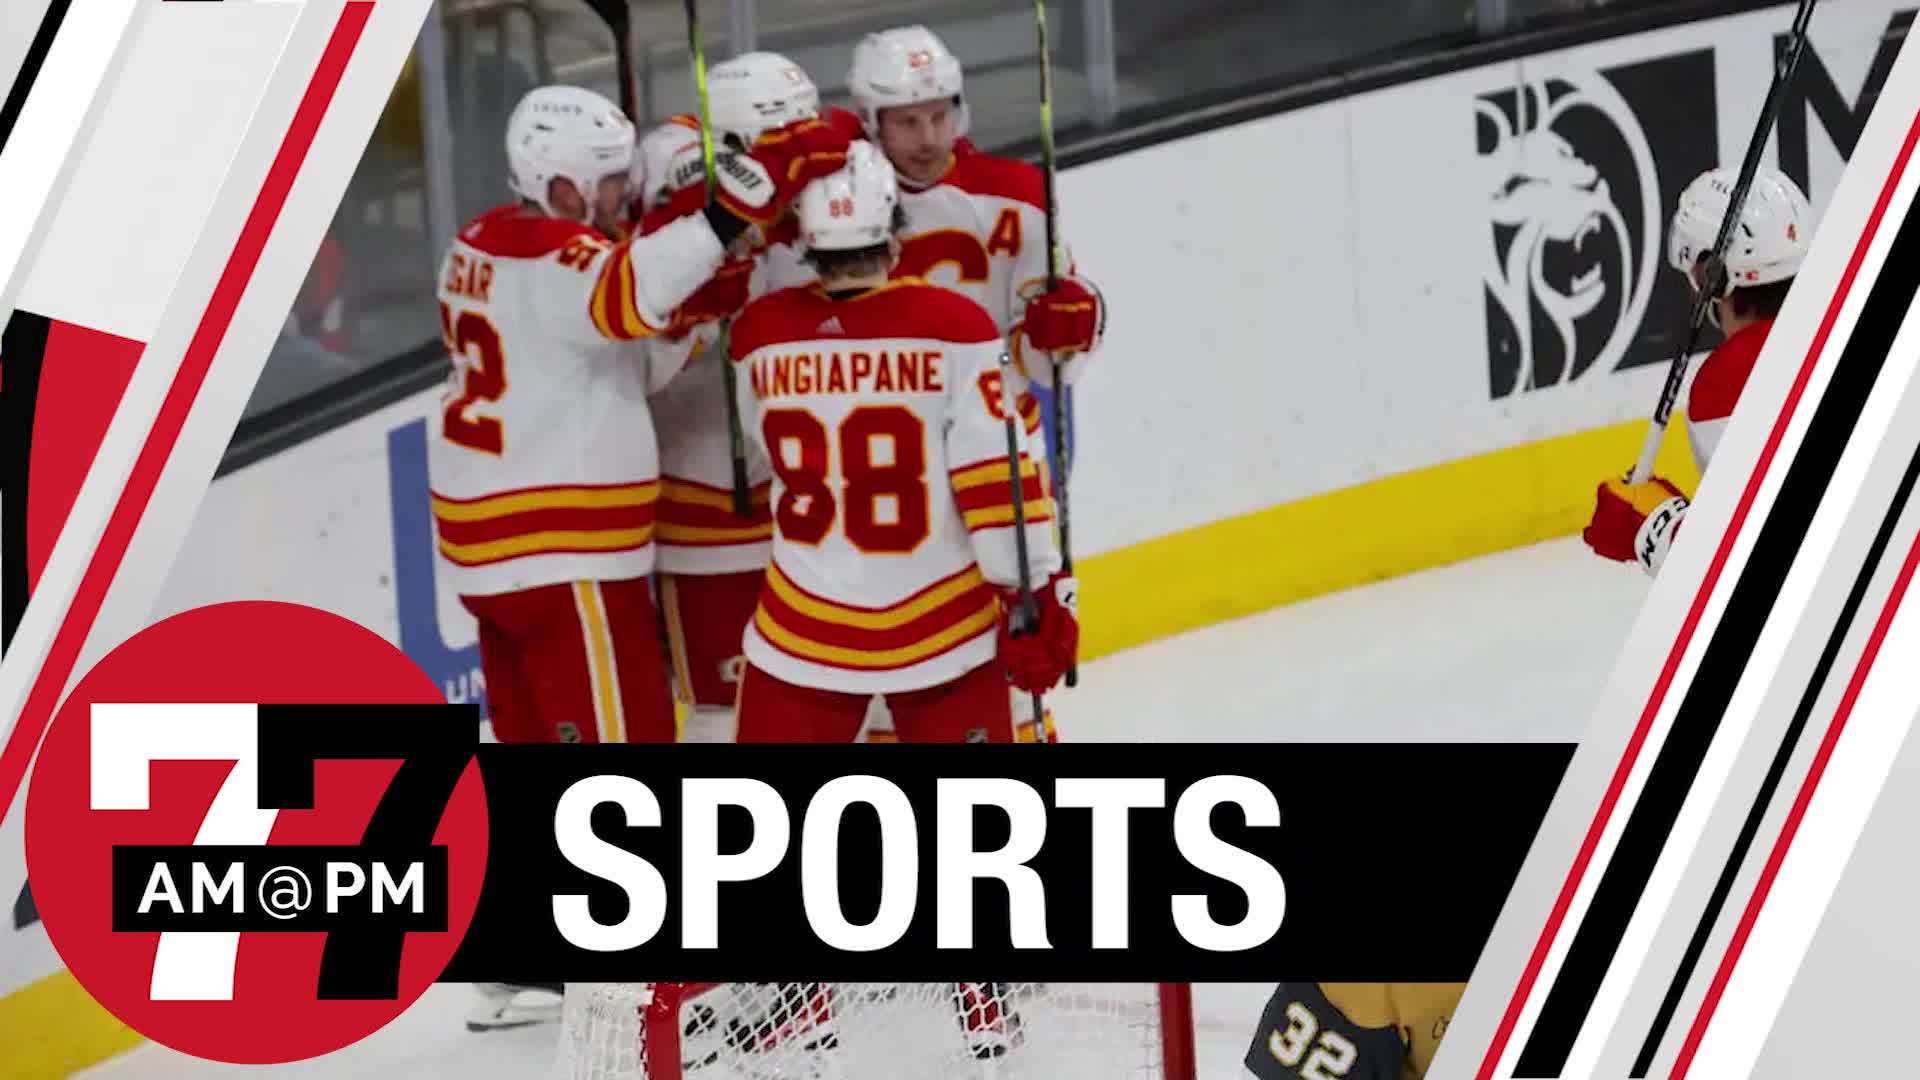 Golden Knights lose to the Flames